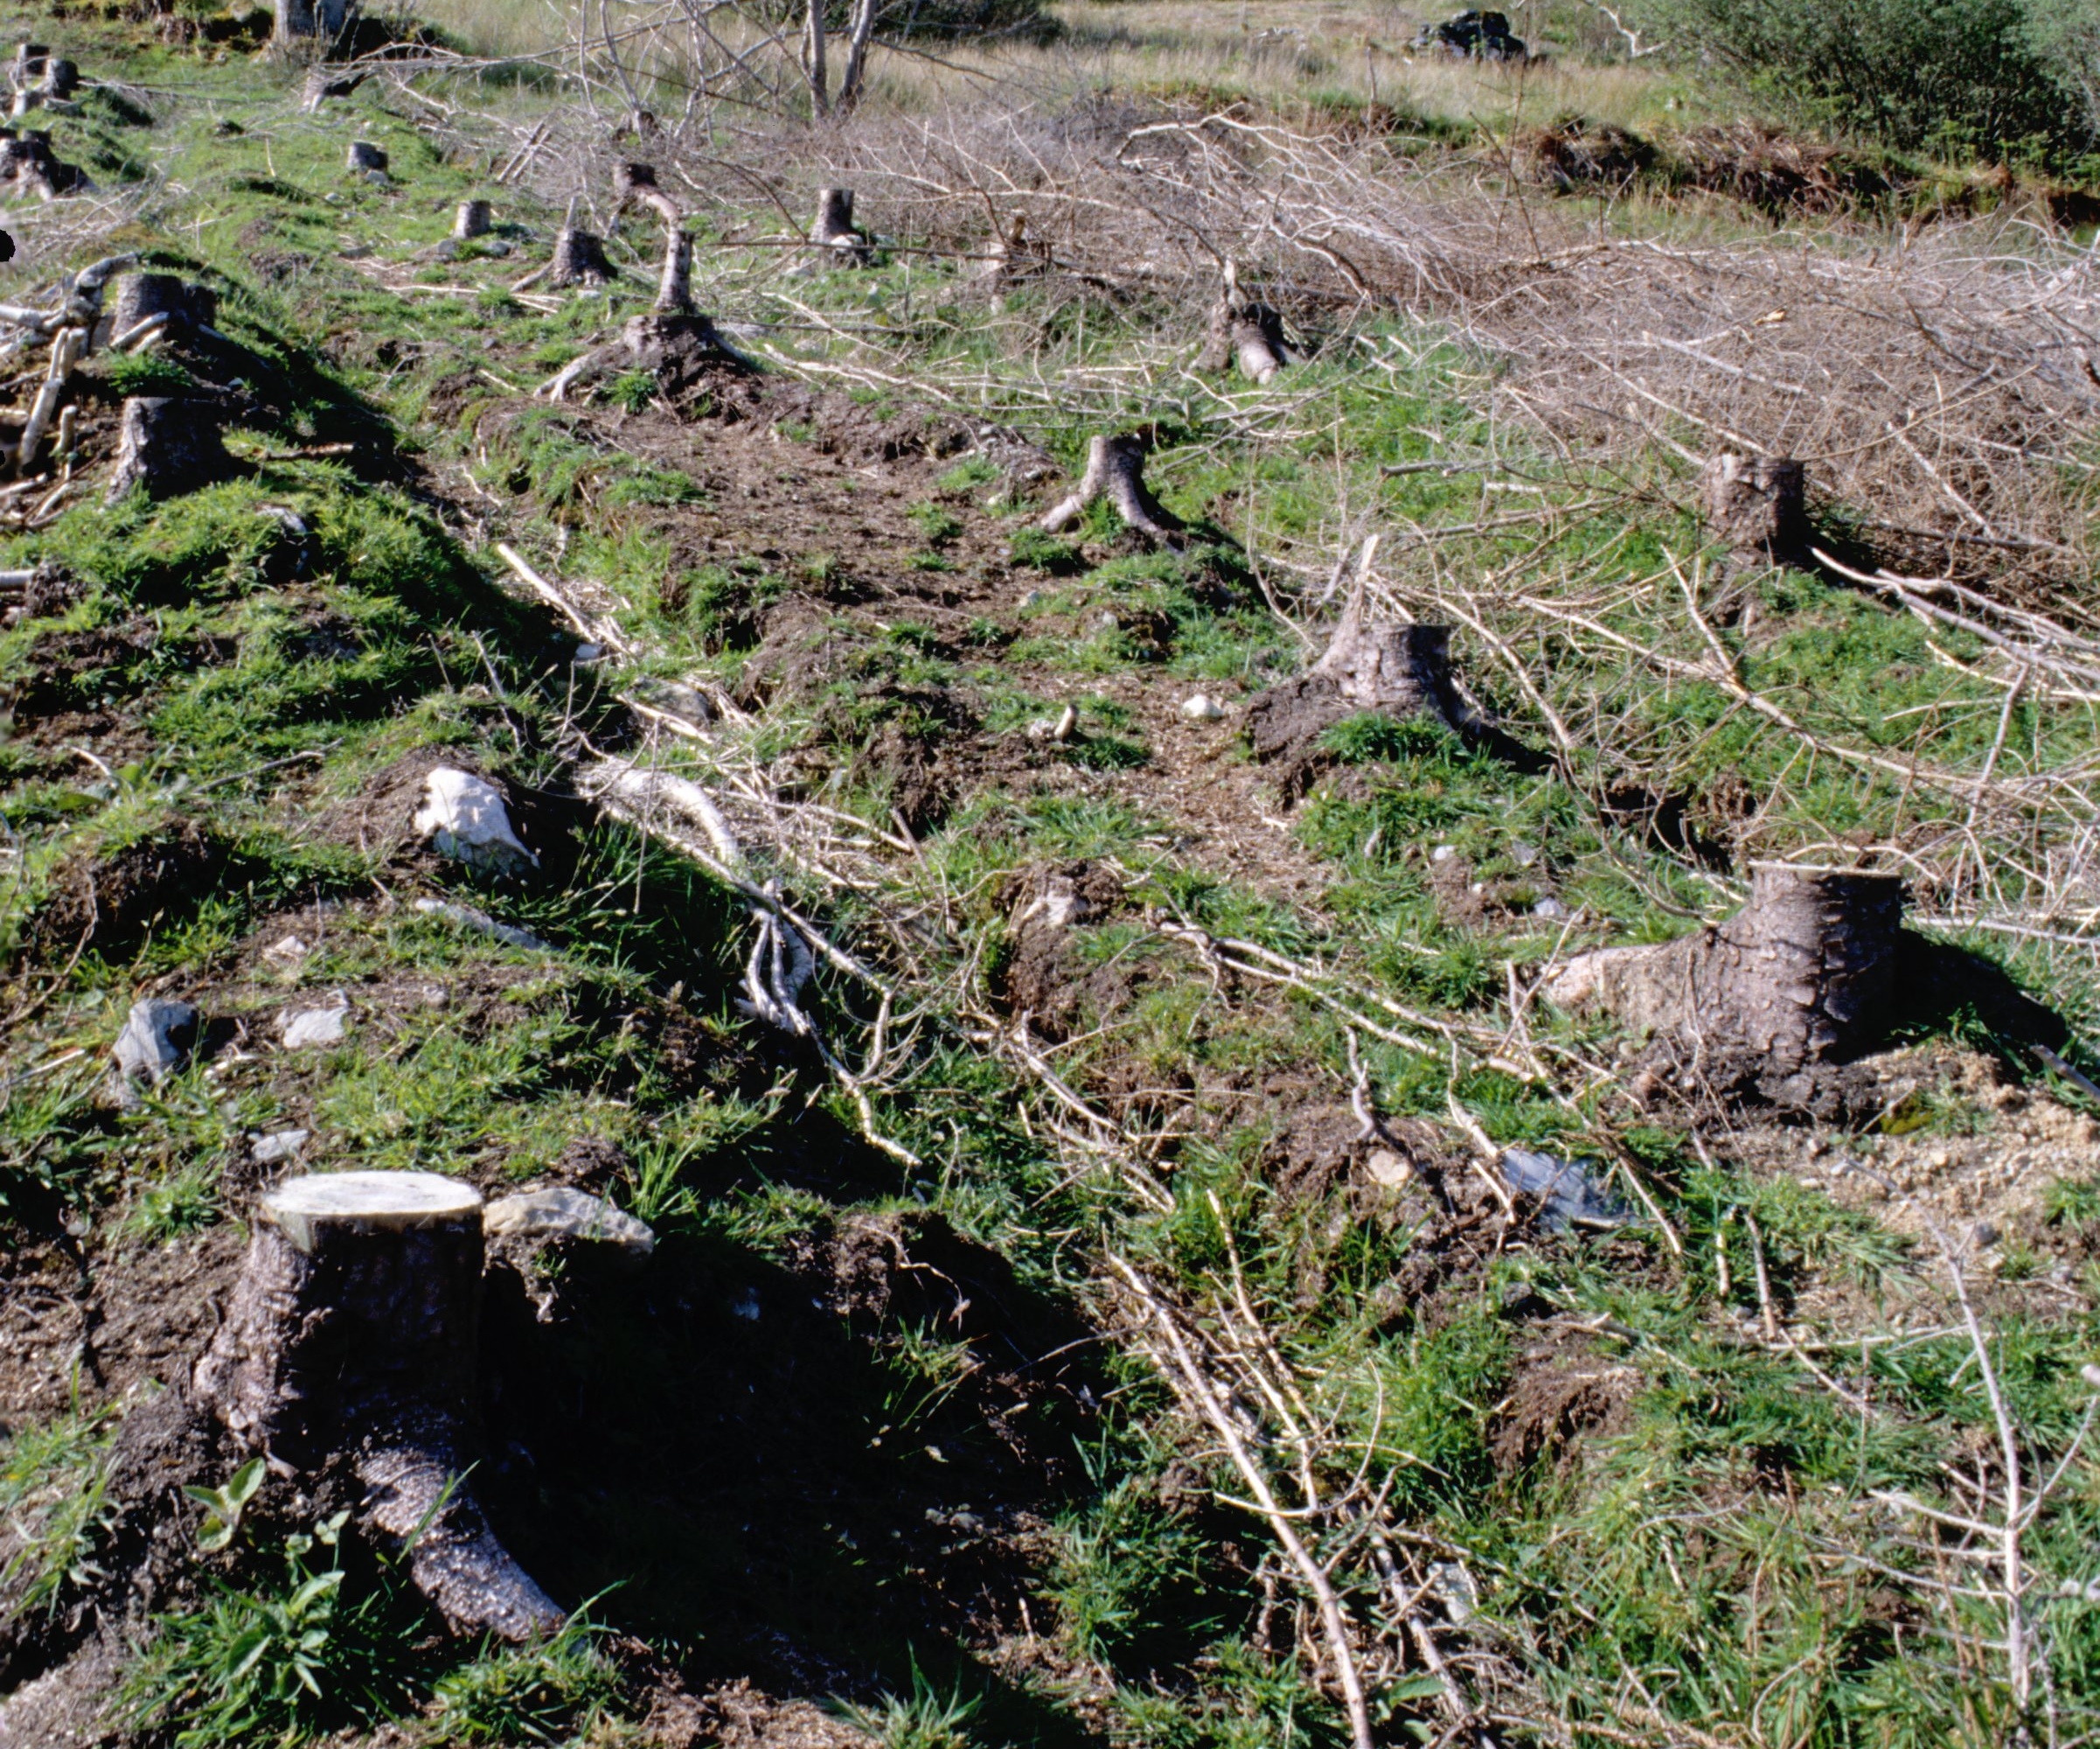 Rows of stumps from felled trees